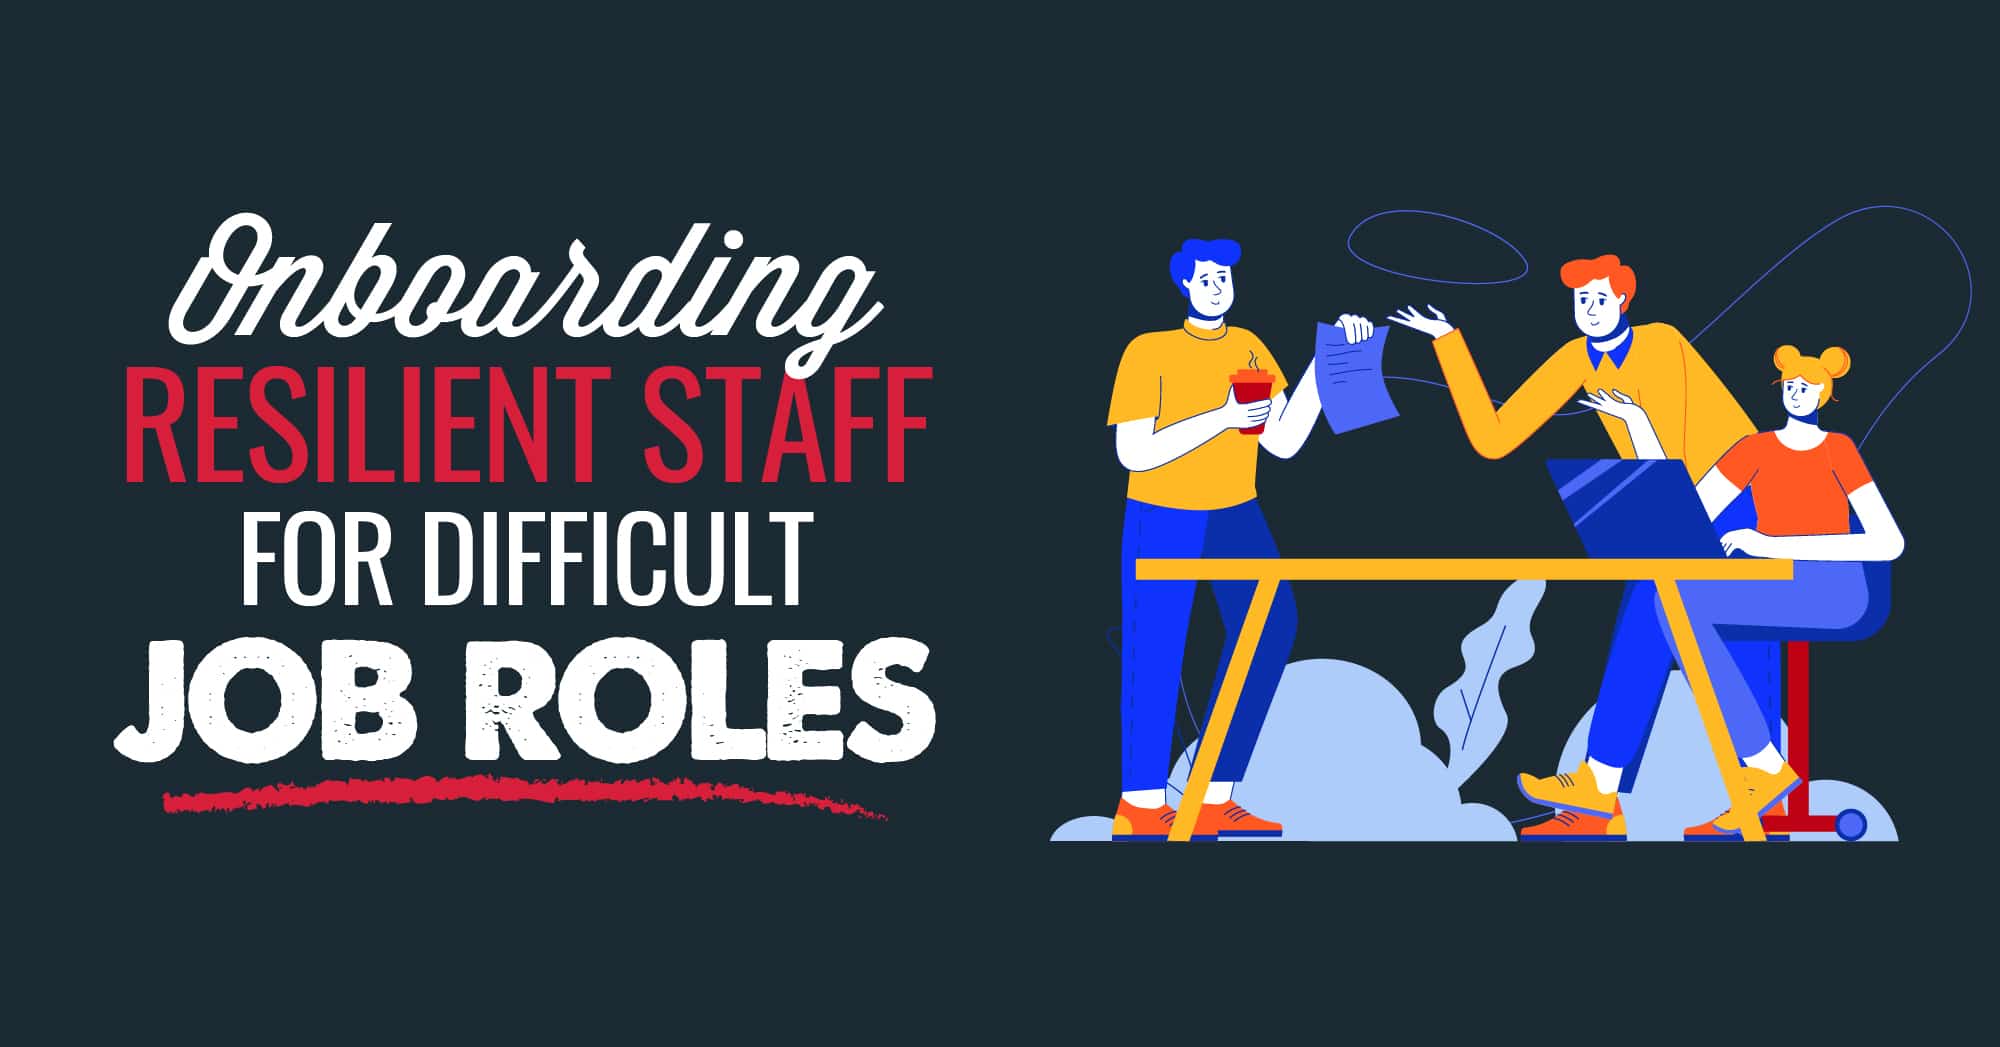 Onboarding resilient staff for difficult job roles